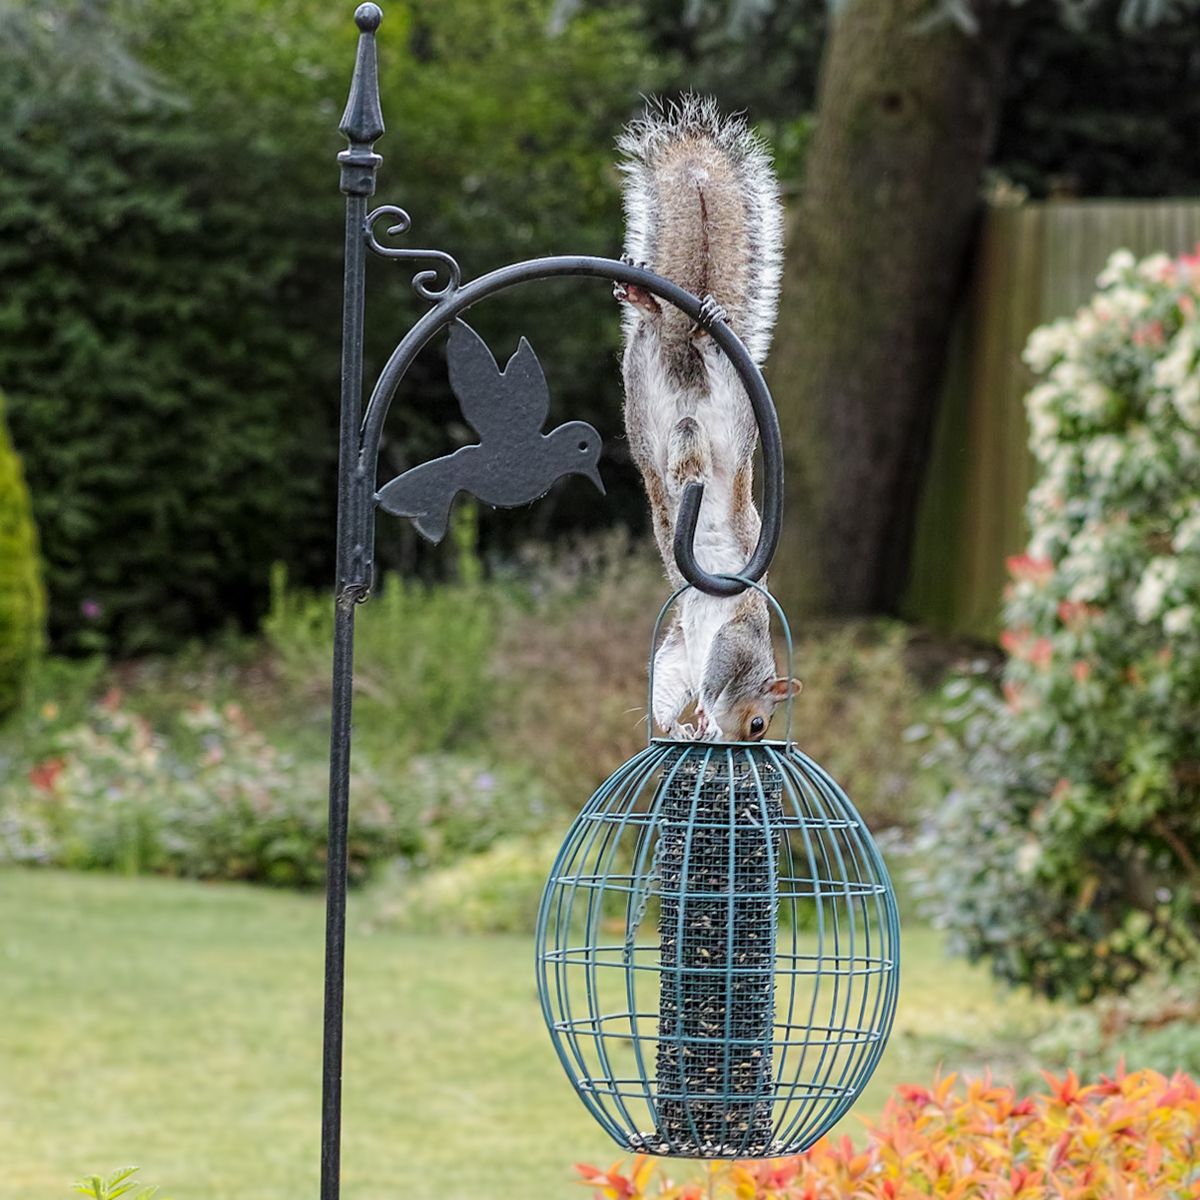 Squirrel hanging on a bird feeder, trying to get at the seed.